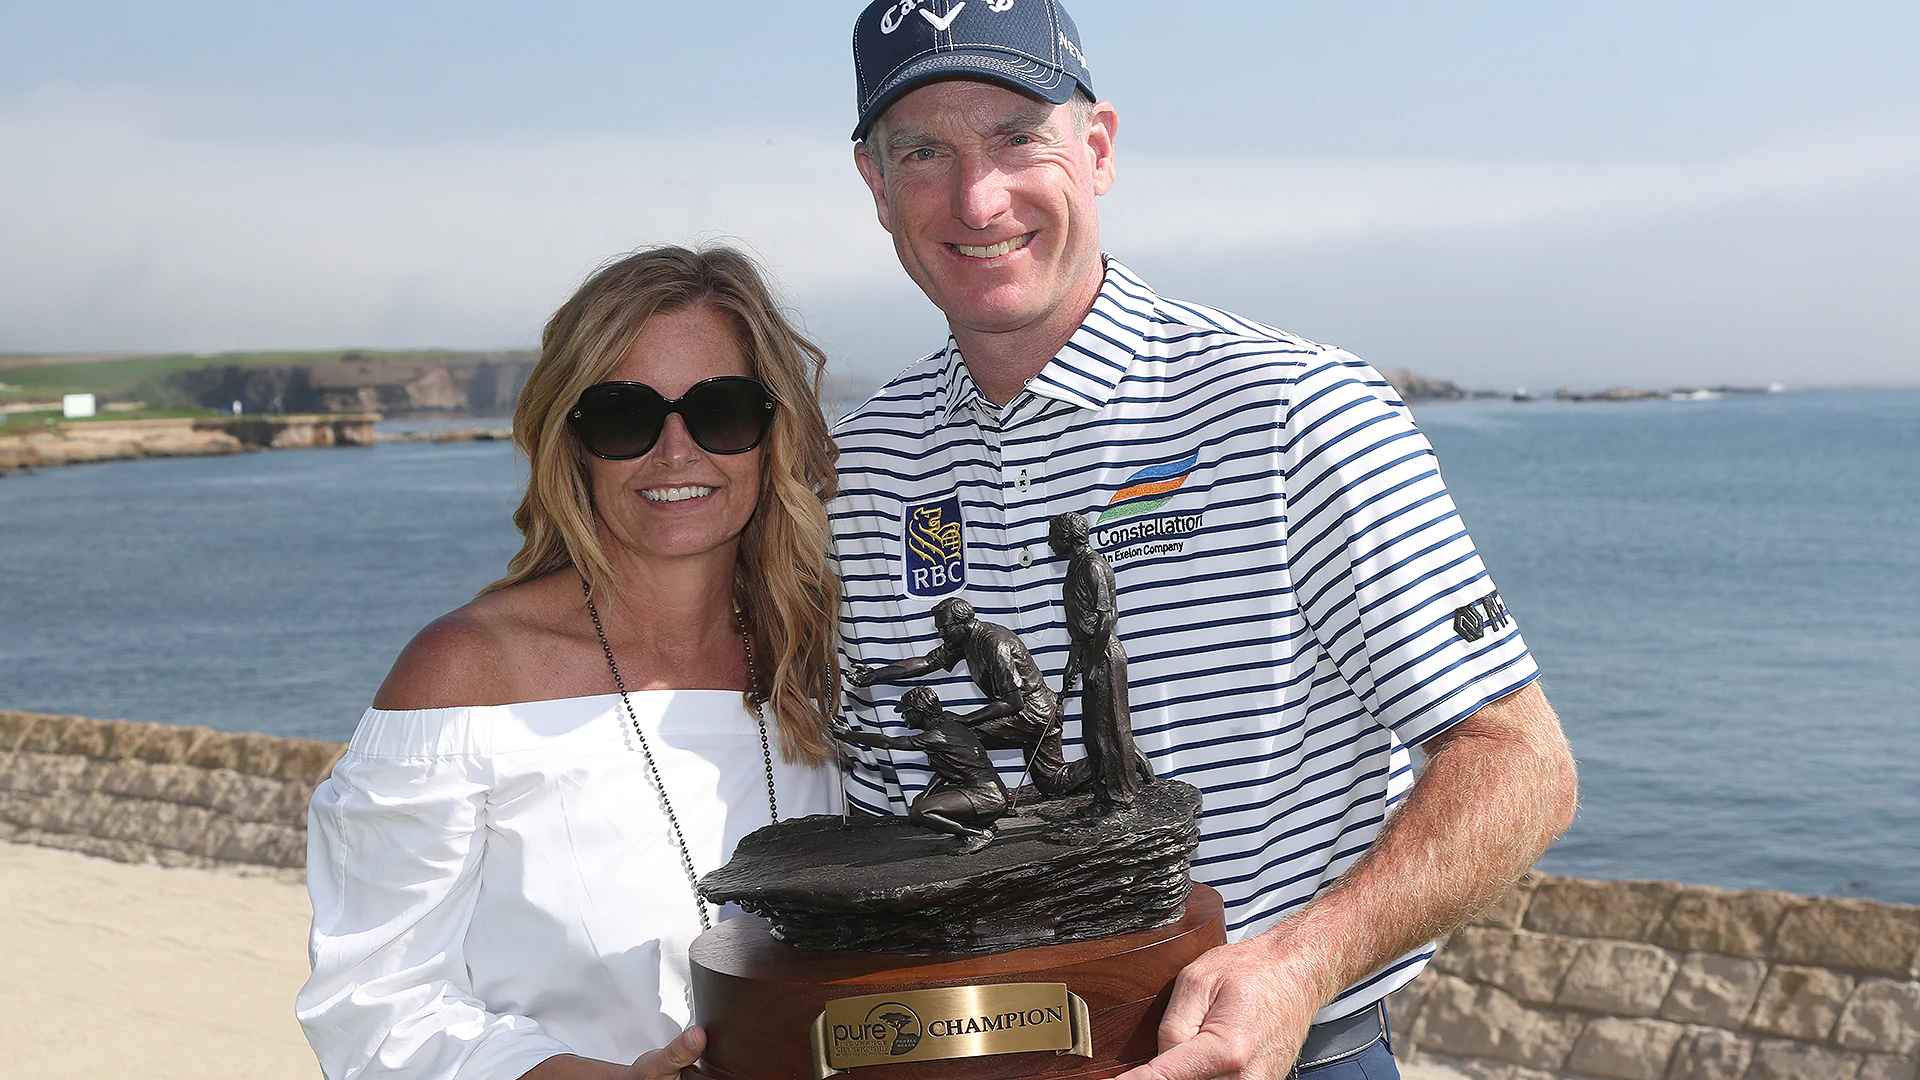 Jim Furyk goes 2-for-2 on Champions, wins in Pebble Beach playoff